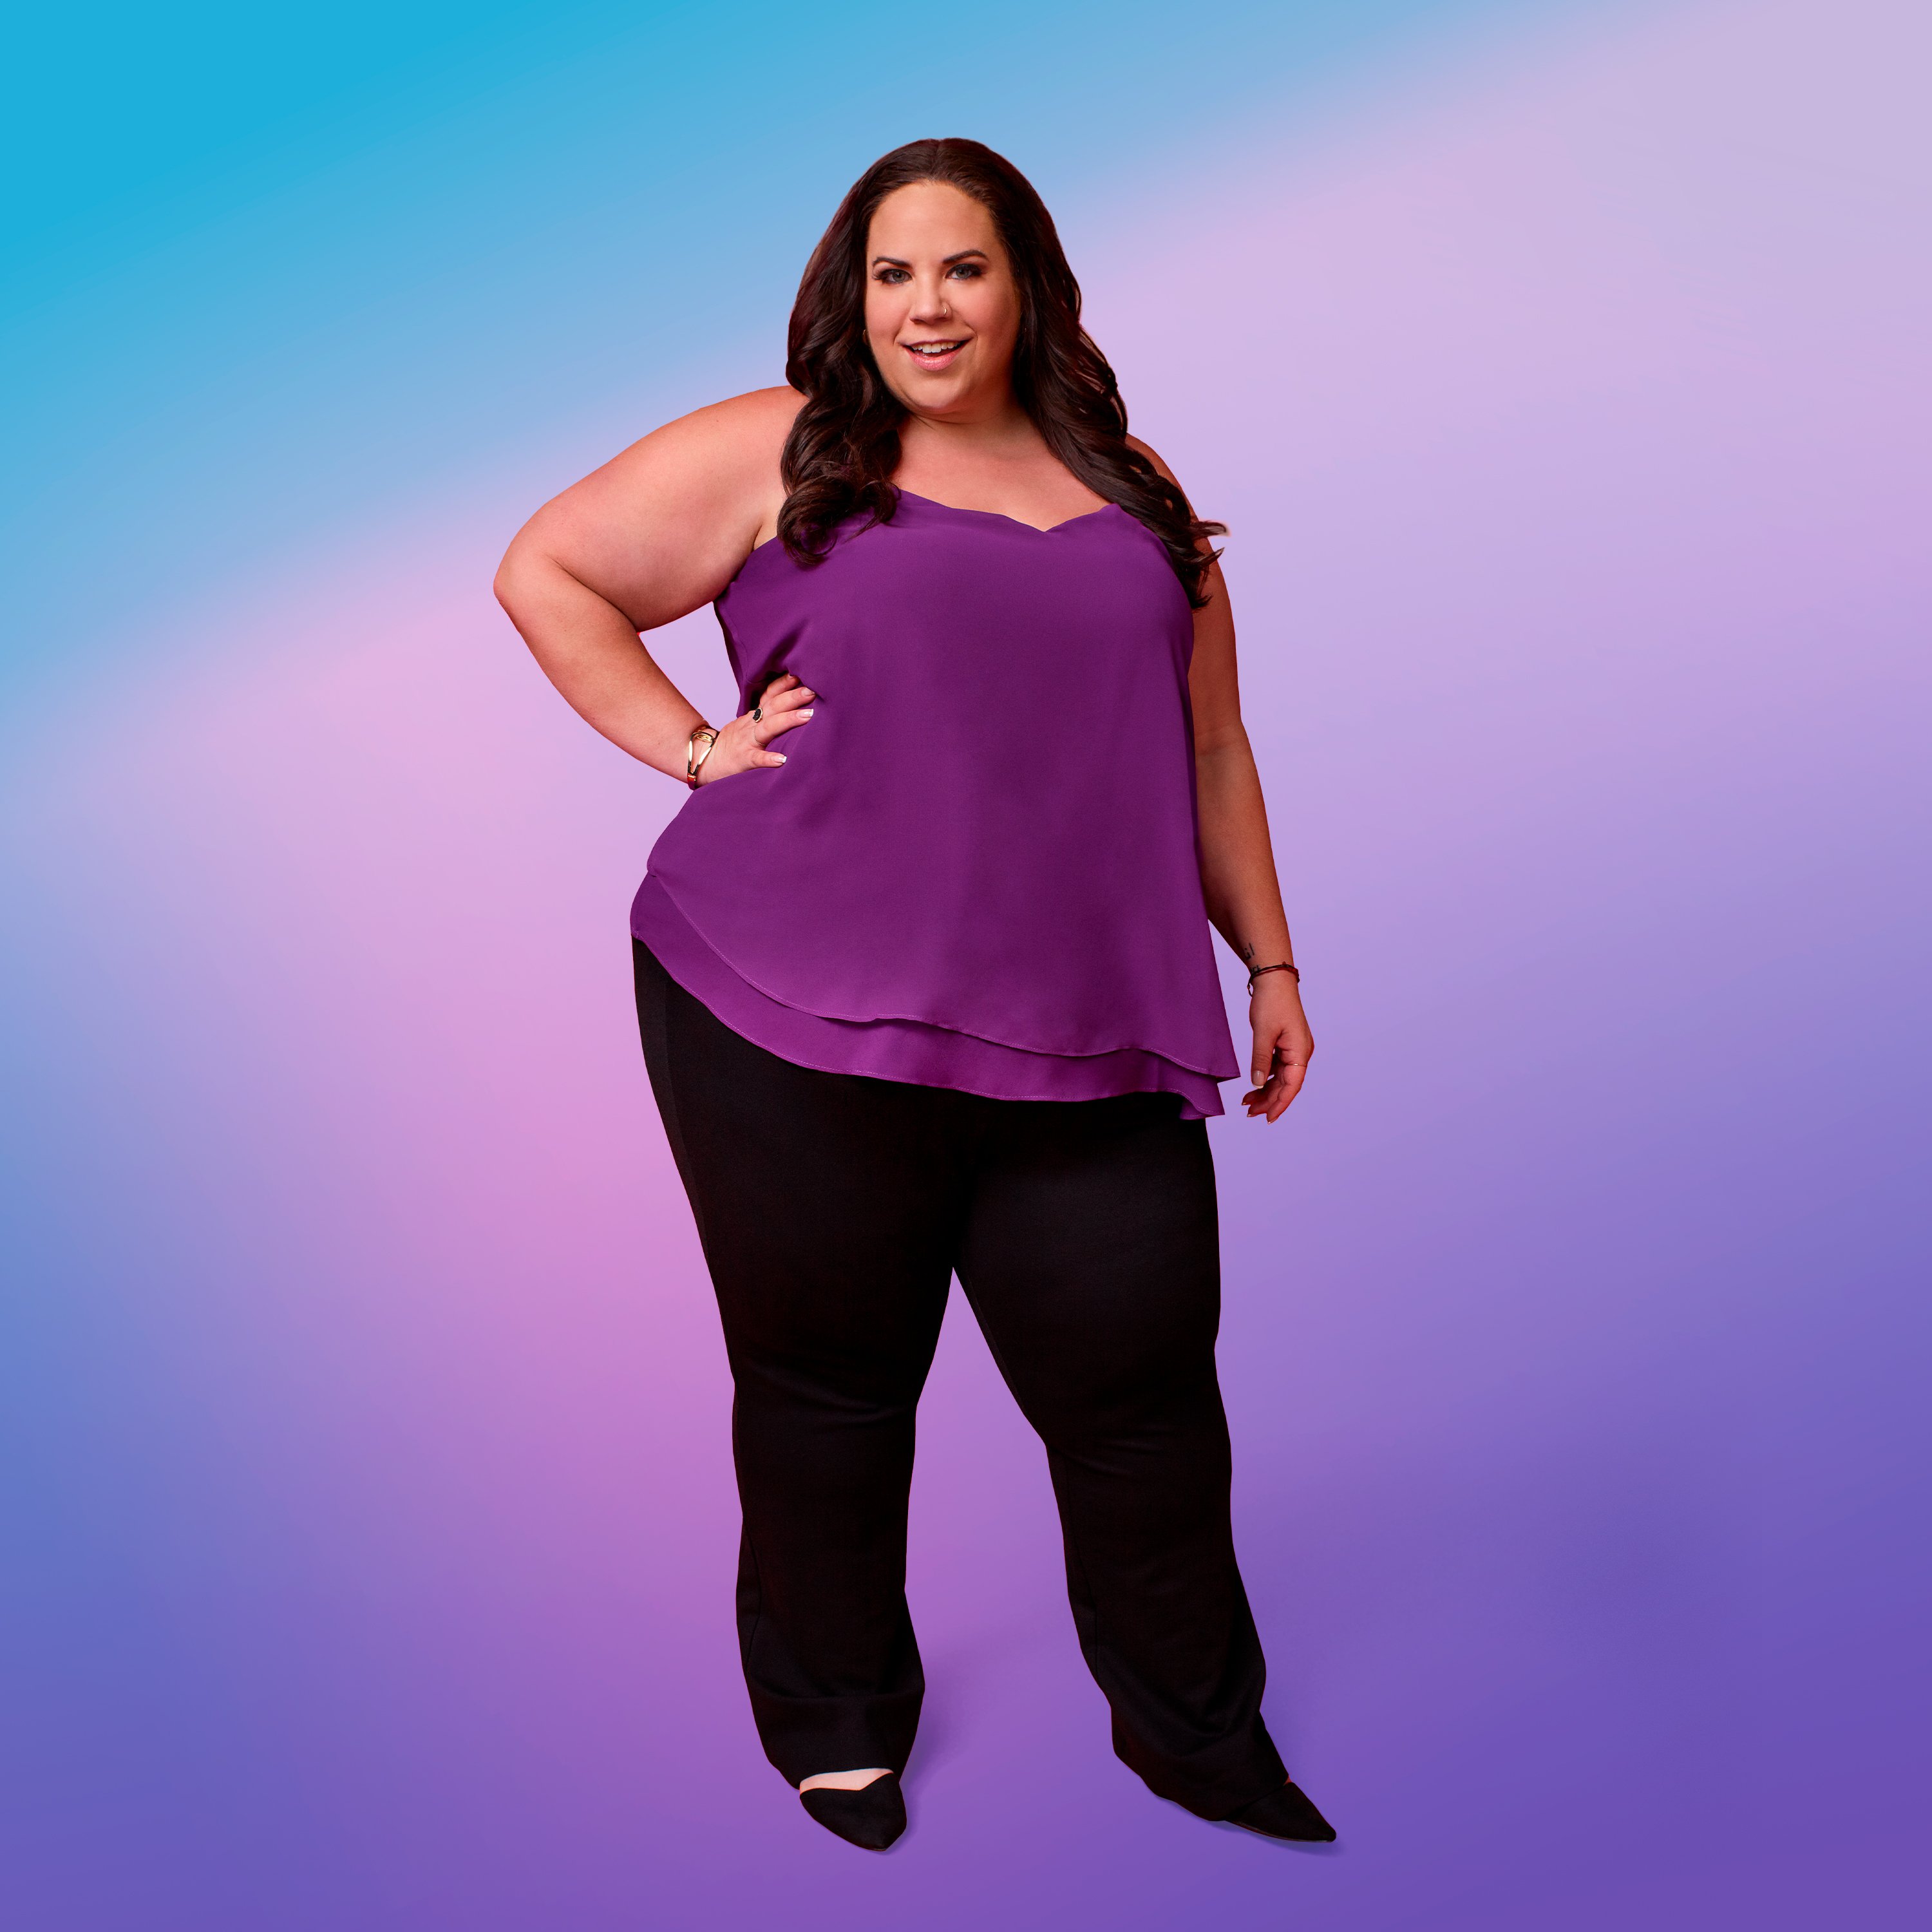 portrait of Whitney Way Thore from 'My Big Fat Fabulous Life' on purple and blue background